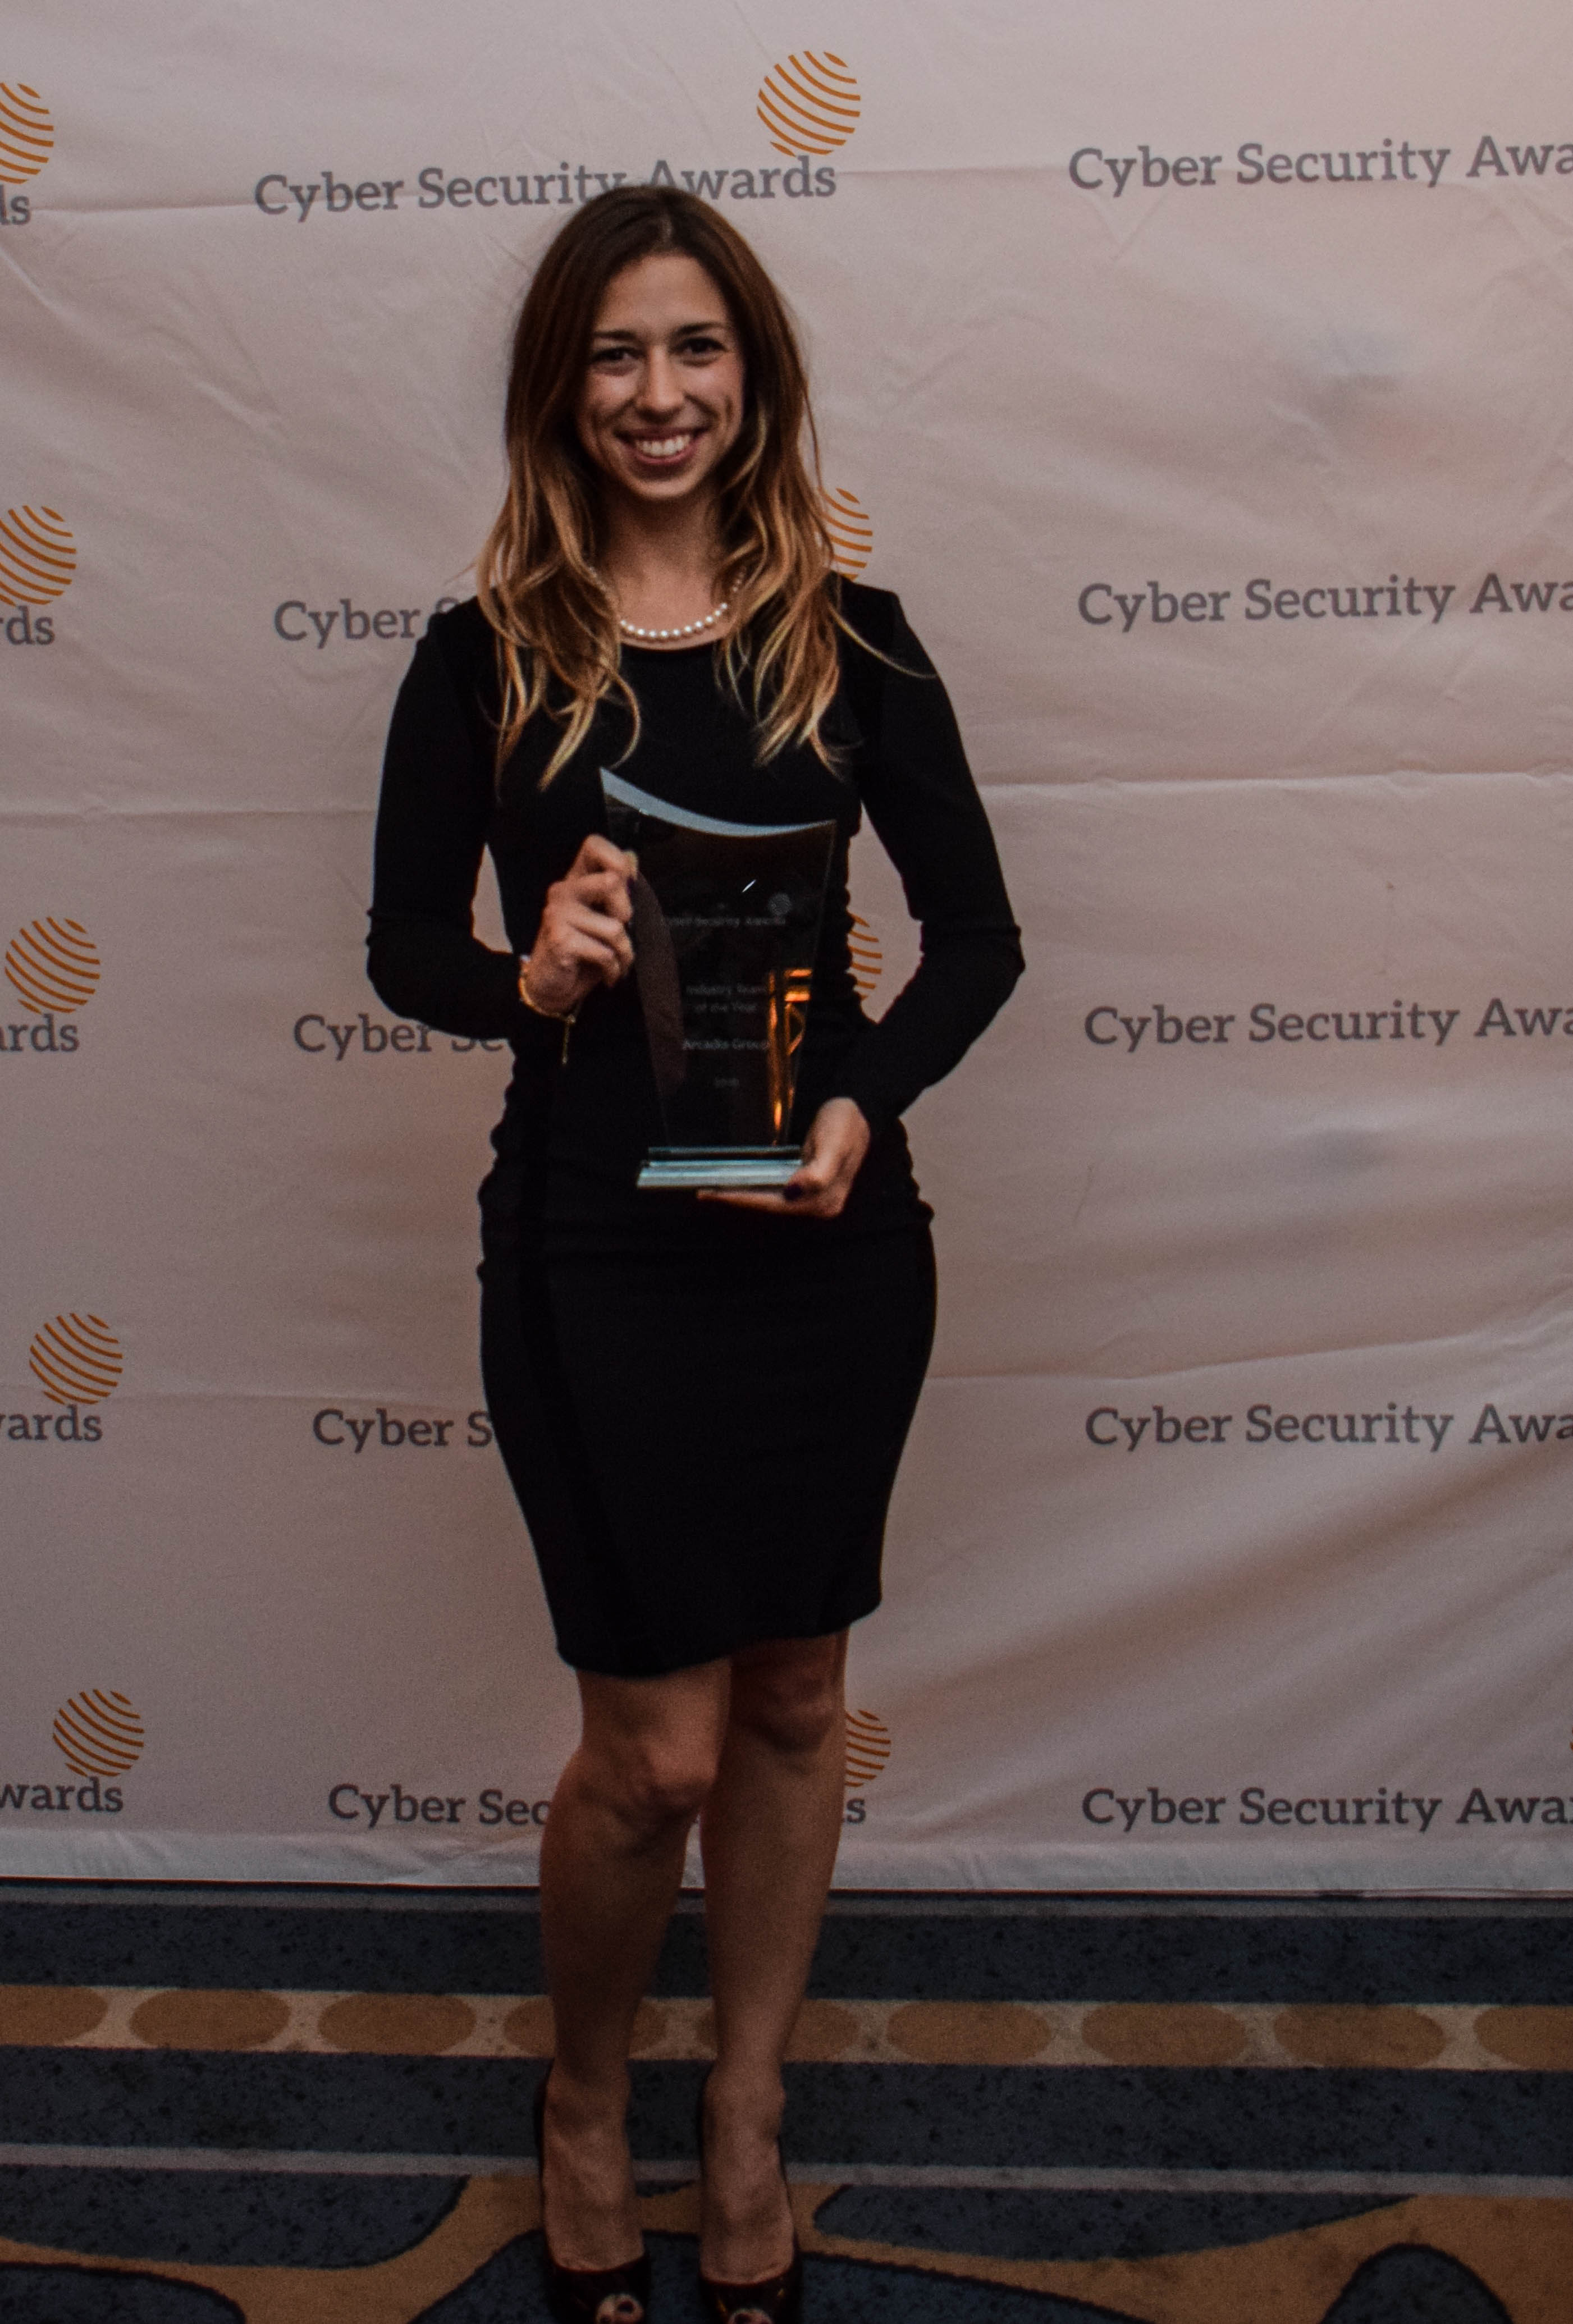 48 Cyber Security Awards